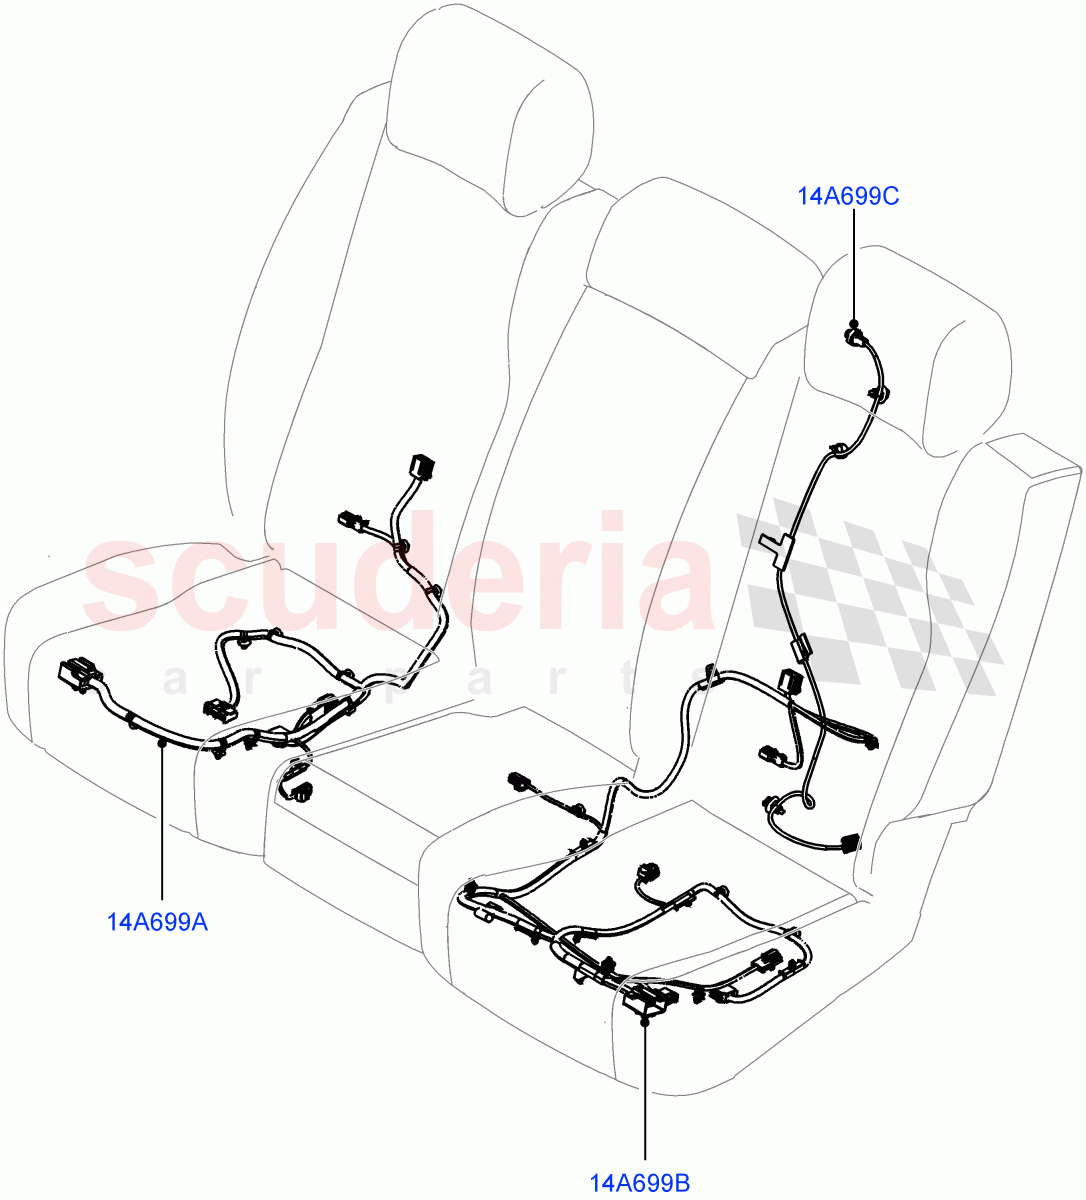 Wiring - Seats(Rear Seats) of Land Rover Land Rover Defender (2020+) [5.0 OHC SGDI SC V8 Petrol]